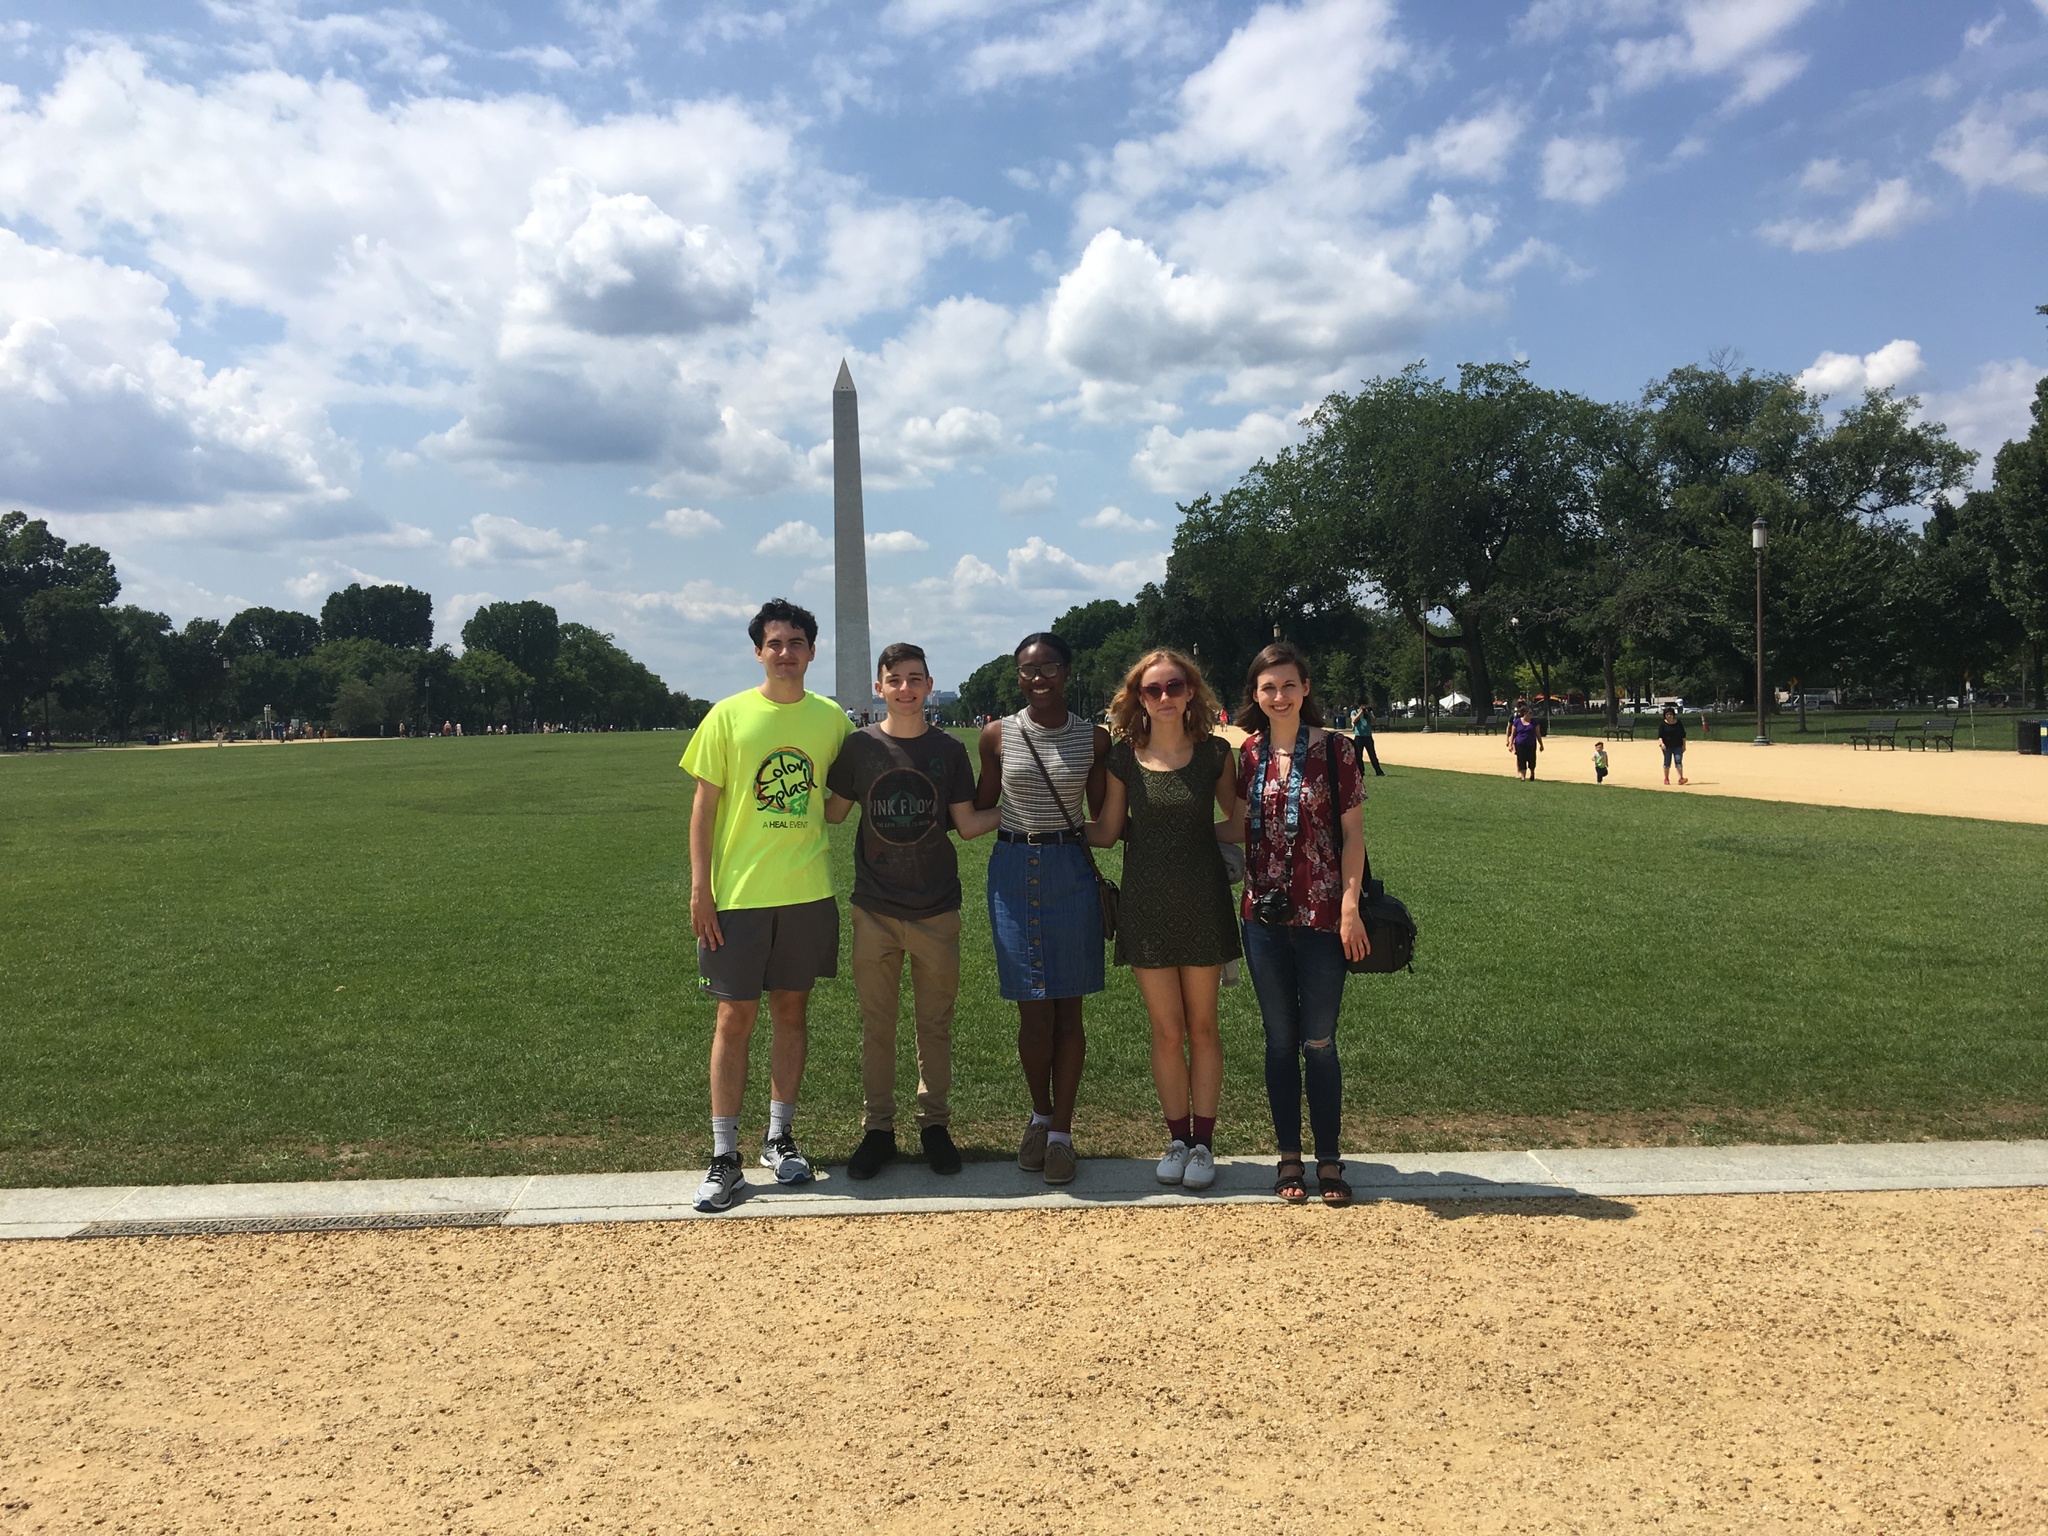 Honors Humanities students pose in front of the Washington Monument on the National Mall.